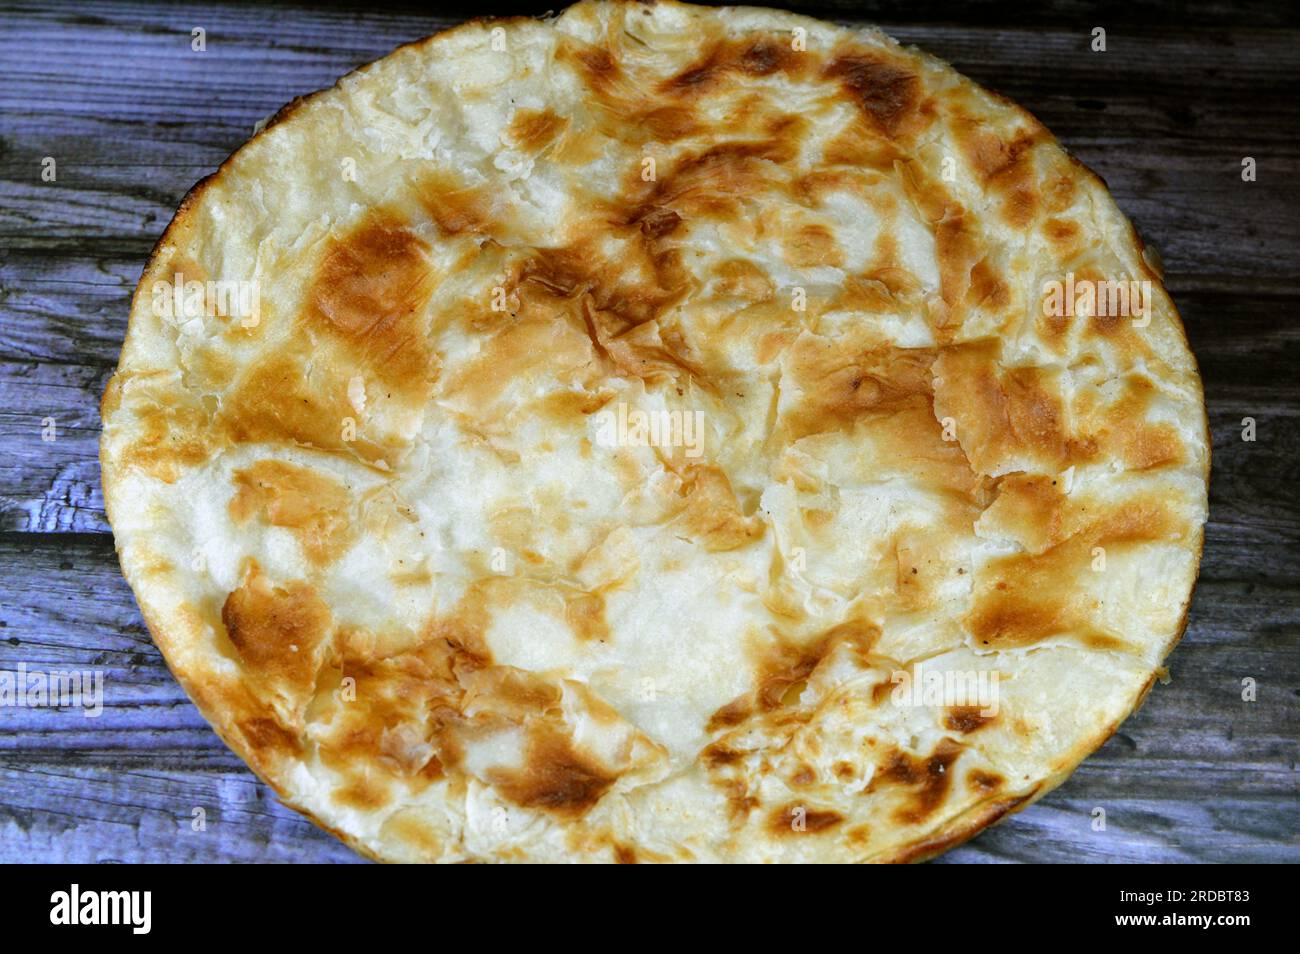 Egyptian Feteer meshaltet, layers upon layers of pastry dough with loads of ghee or butter in between, one of the famous Egyptian pastry recipes, a fl Stock Photo